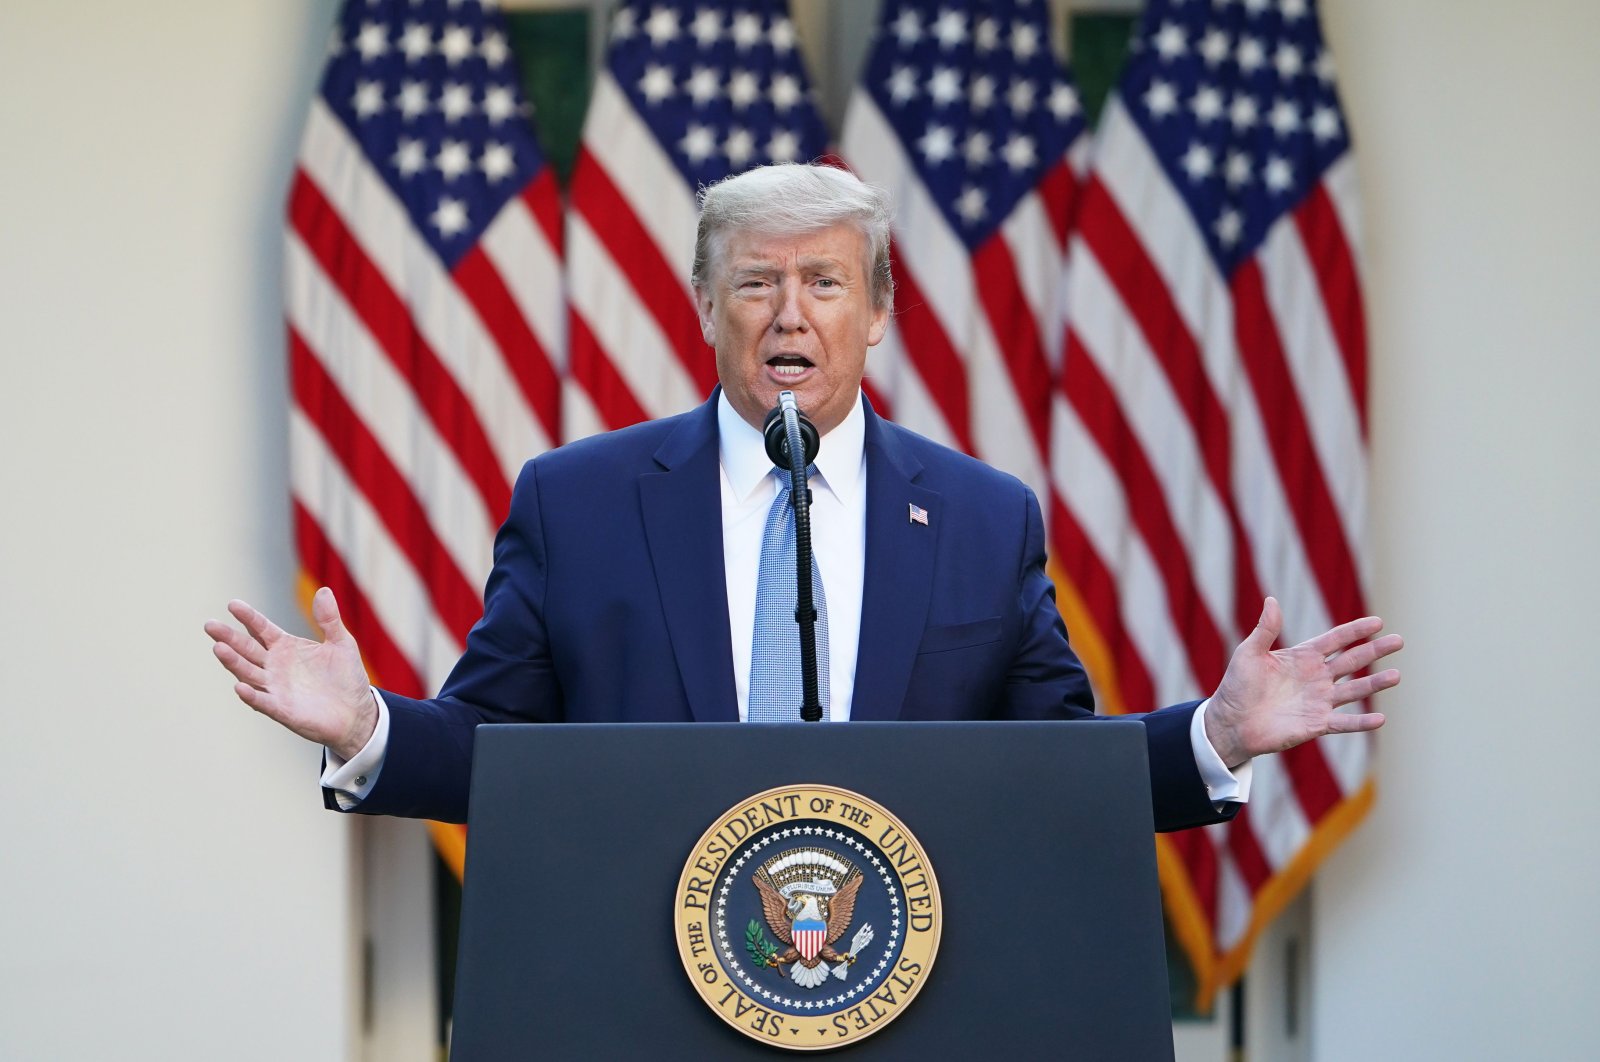 U.S. President Donald Trump gestures as he speaks during the daily briefing on the novel coronavirus in the Rose Garden of the White House, in Washington, D.C., U.S., April 15, 2020. (AFP Photo)